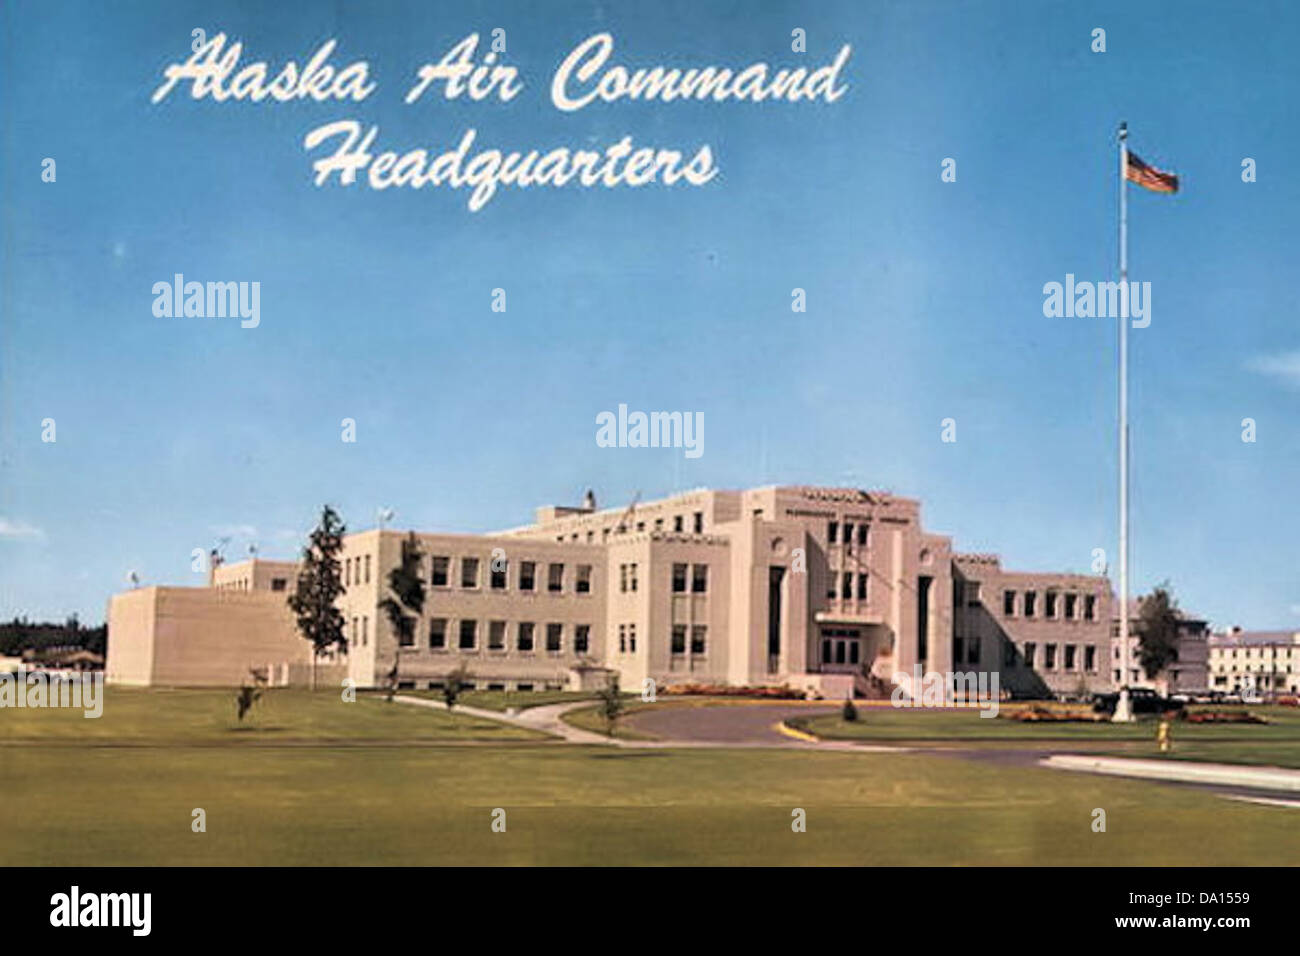 AAC-Headquarters-1960s-Post Card Stock Photo